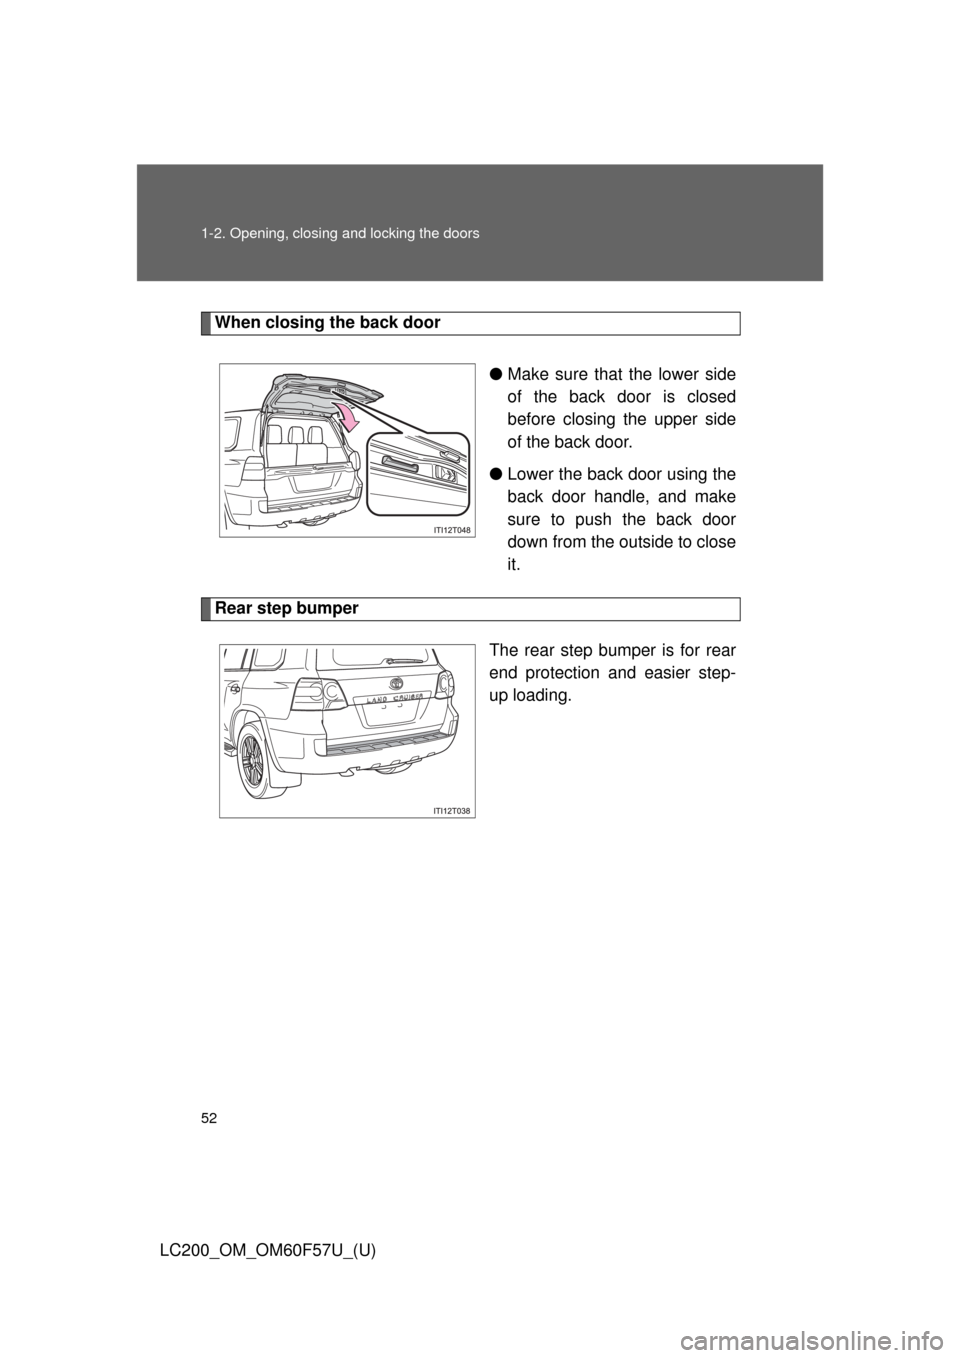 TOYOTA LAND CRUISER 2013 J200 Owners Manual 52 1-2. Opening, closing and locking the doors
LC200_OM_OM60F57U_(U)
When closing the back door
●Make sure that the lower side
of the back door is closed
before closing the upper side
of the back do